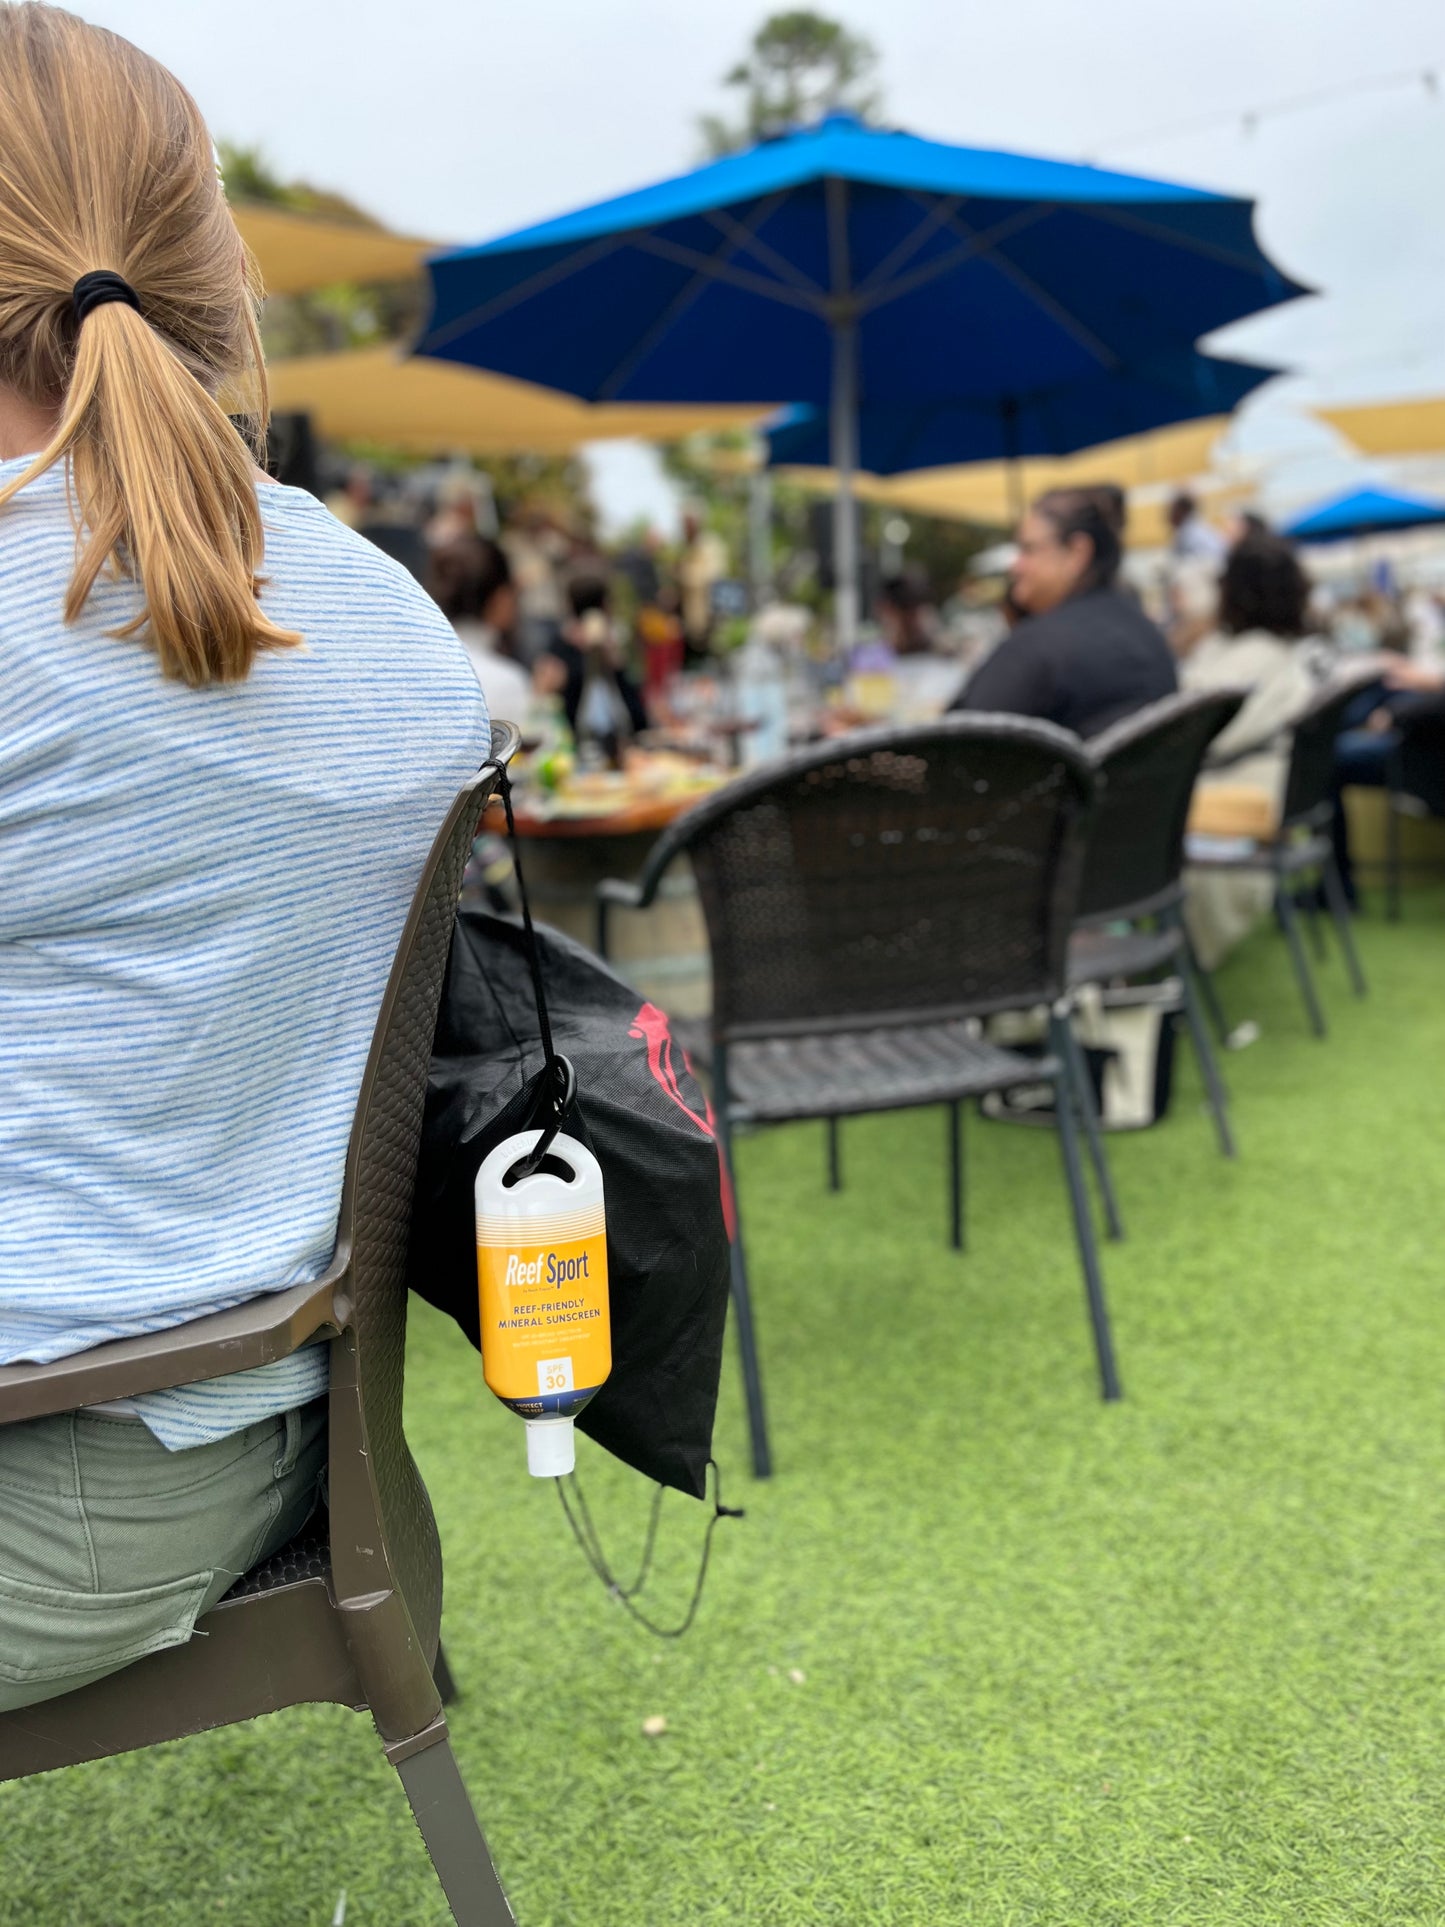 XL Sunscreen Flasks: Your Hidden Solution for Sneaking Alcohol – Classy Wino